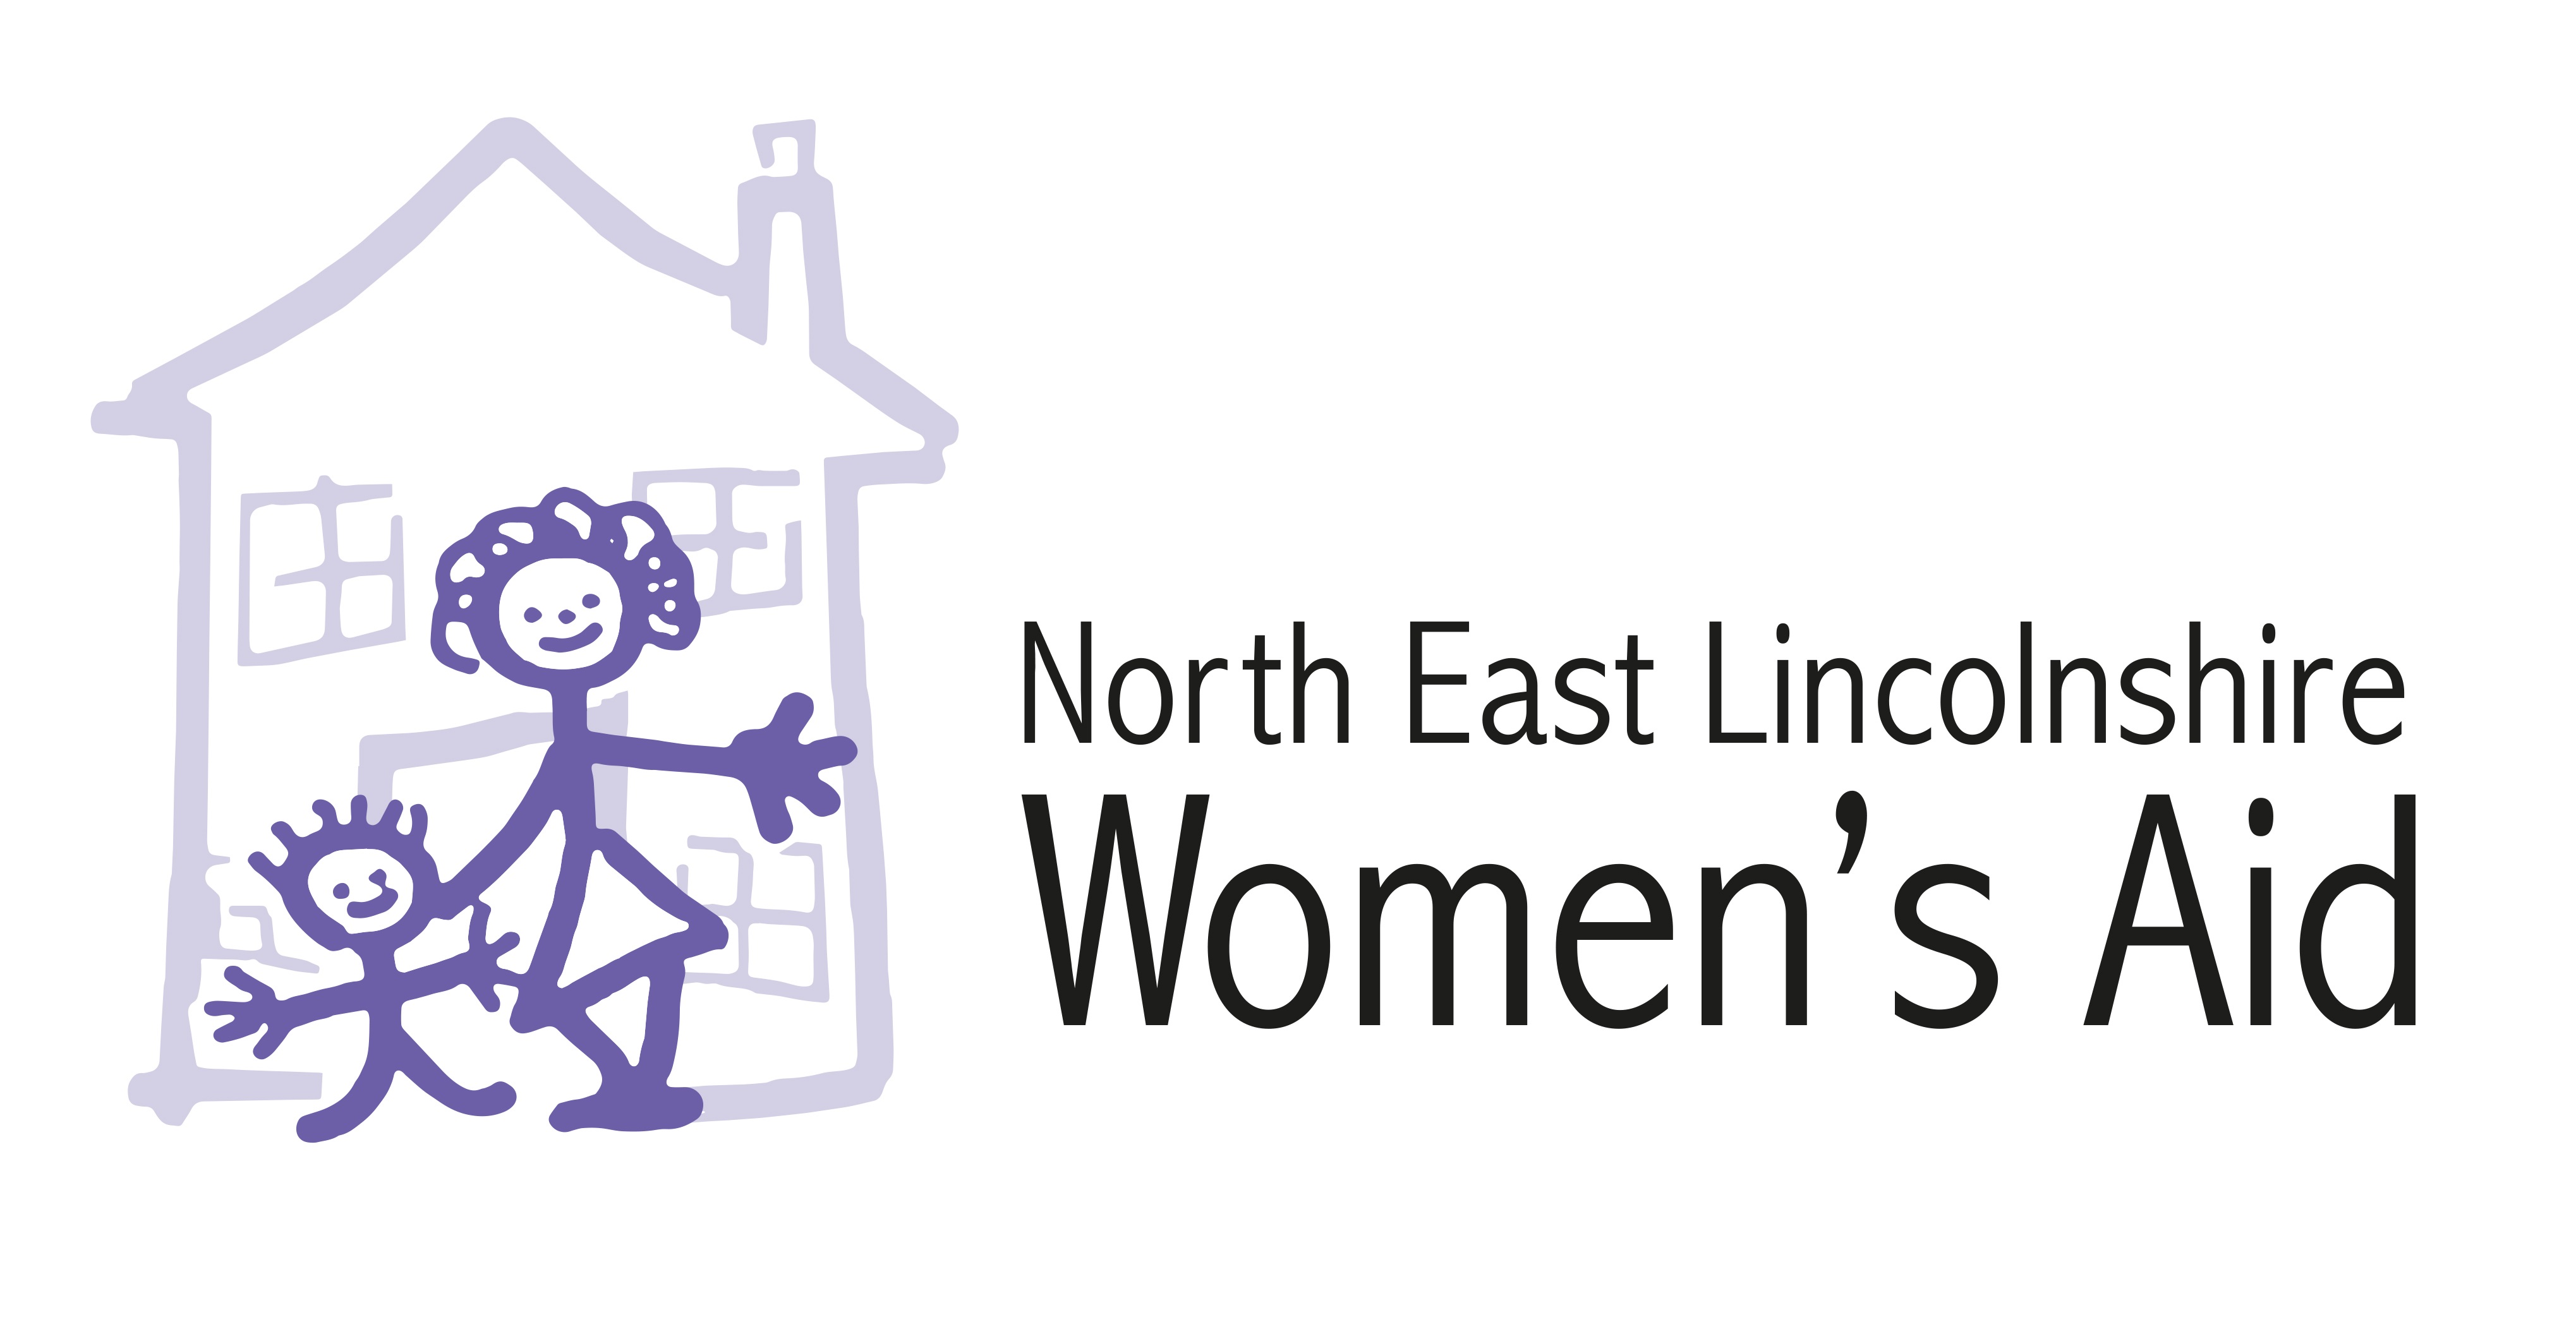 North East Lincolnshire Women's Aid